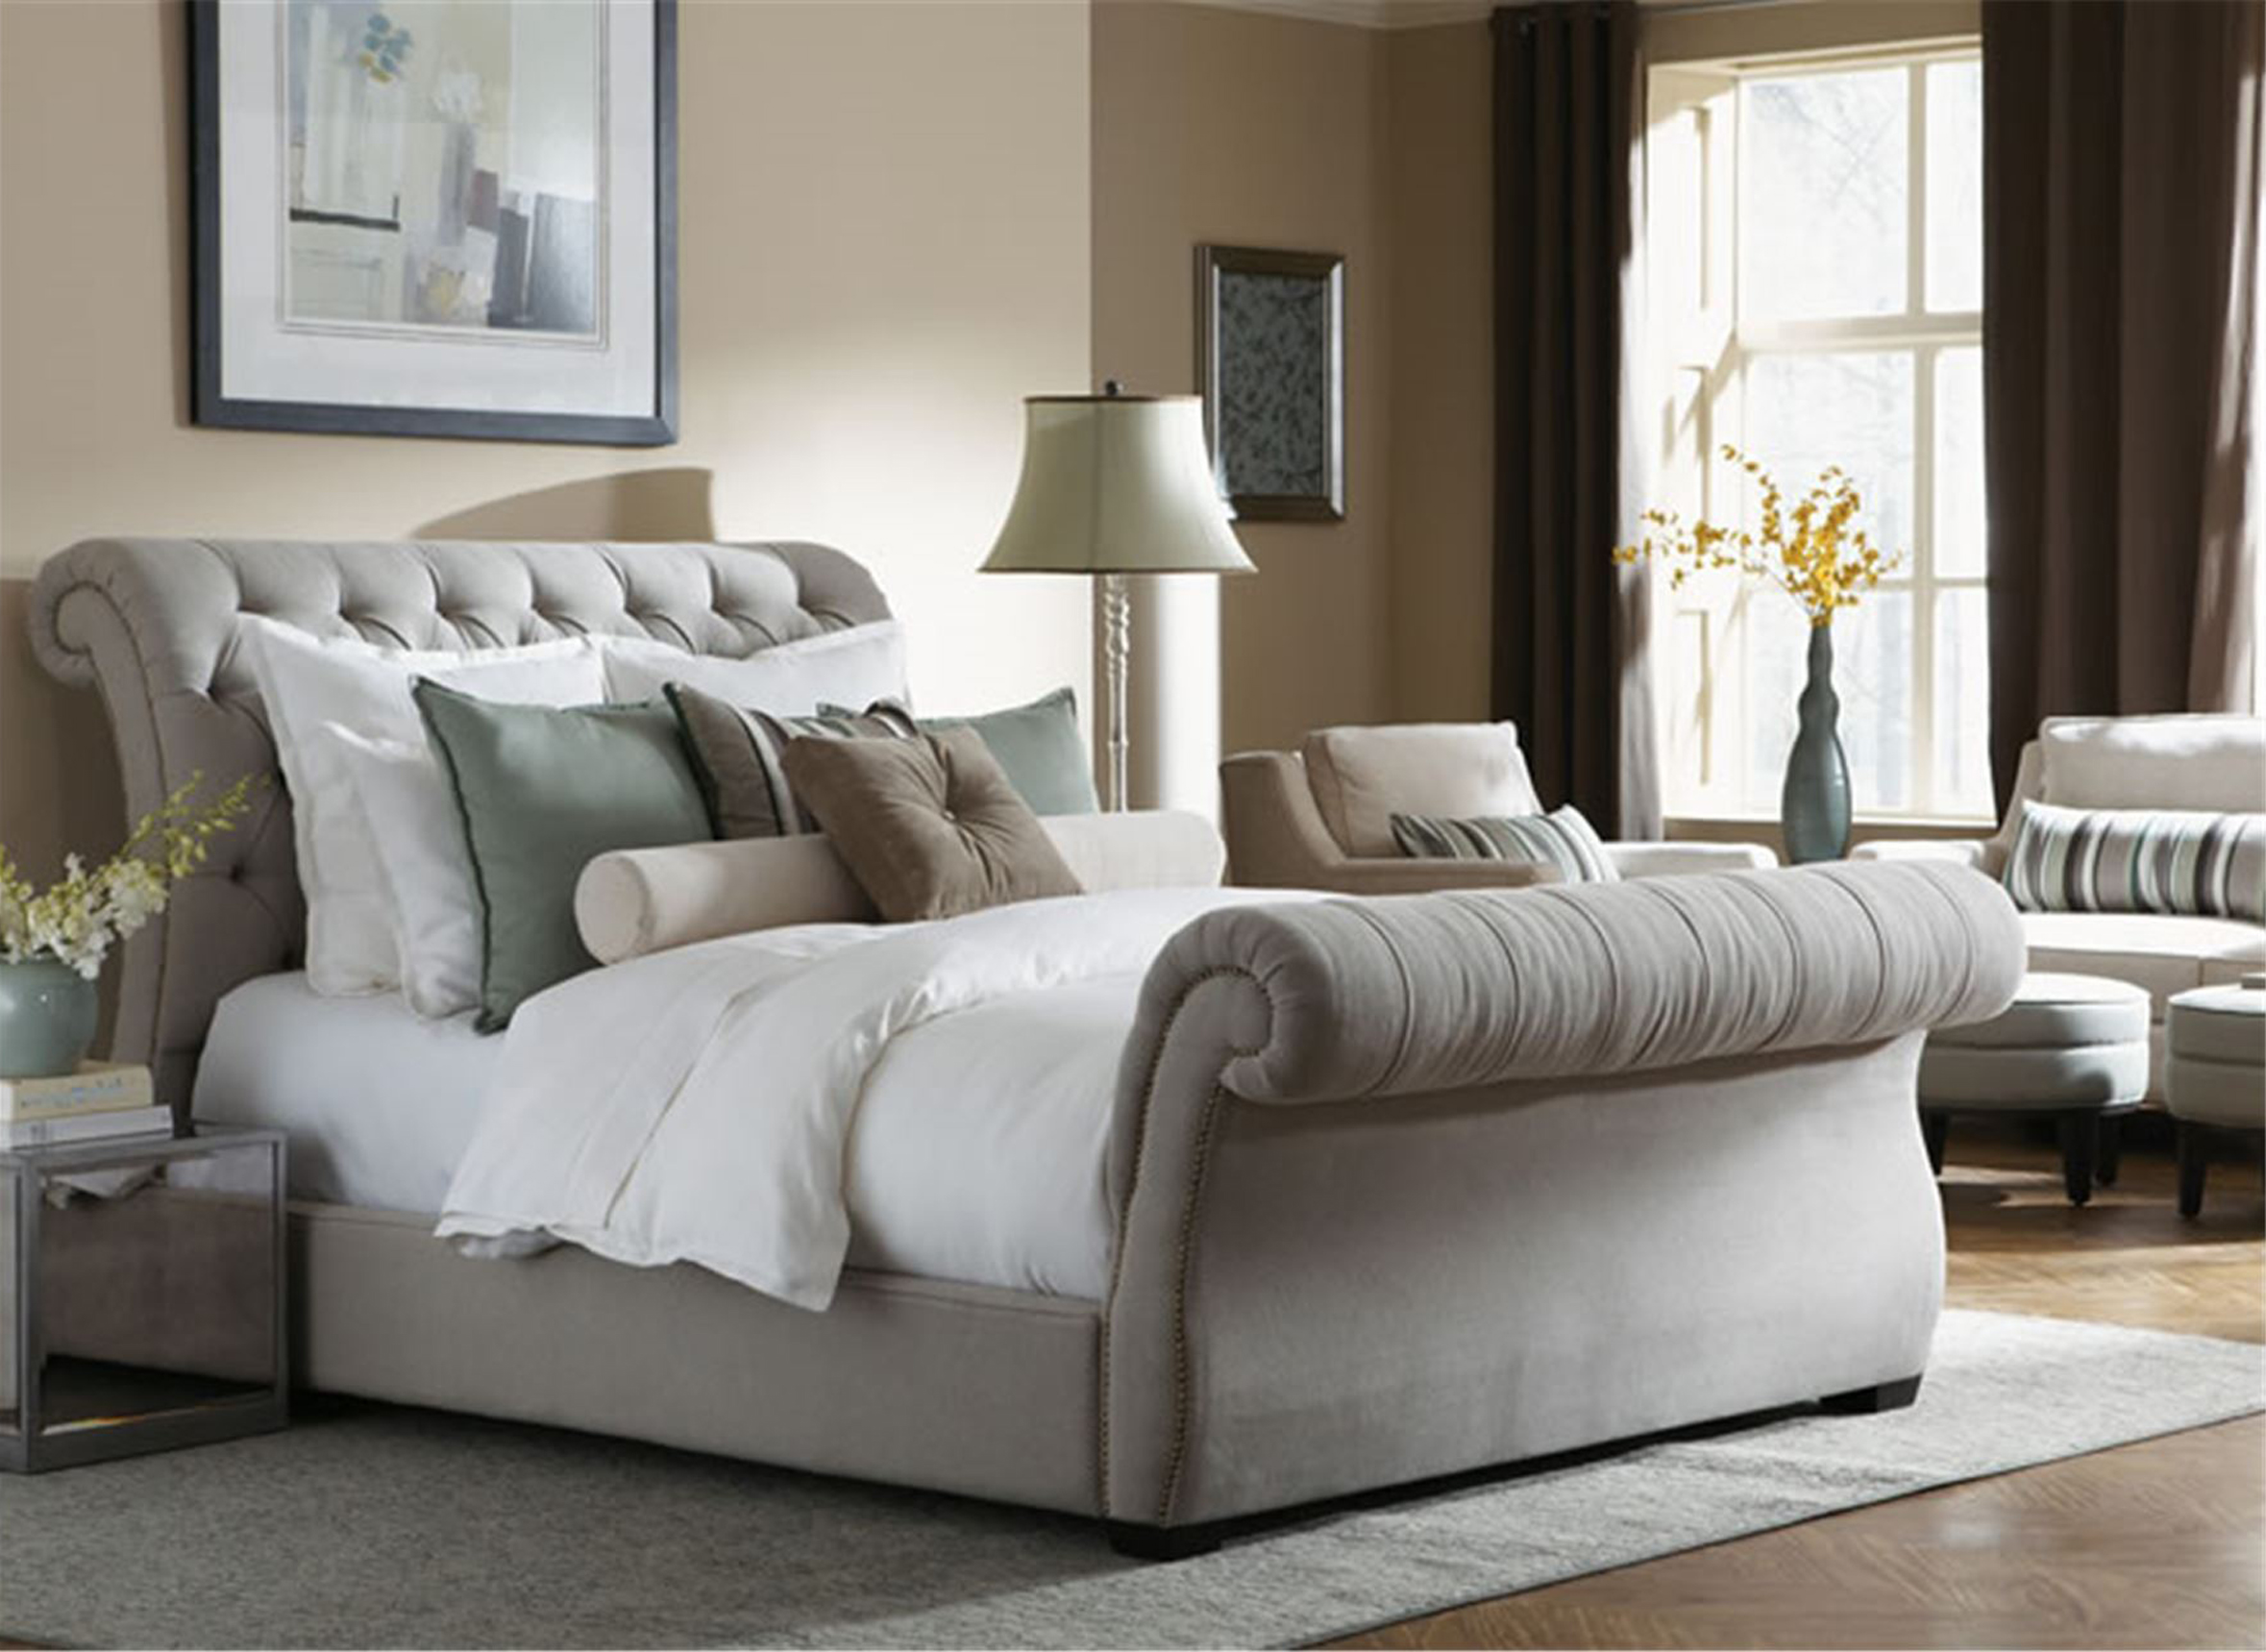 R-187 Upholstered Bed